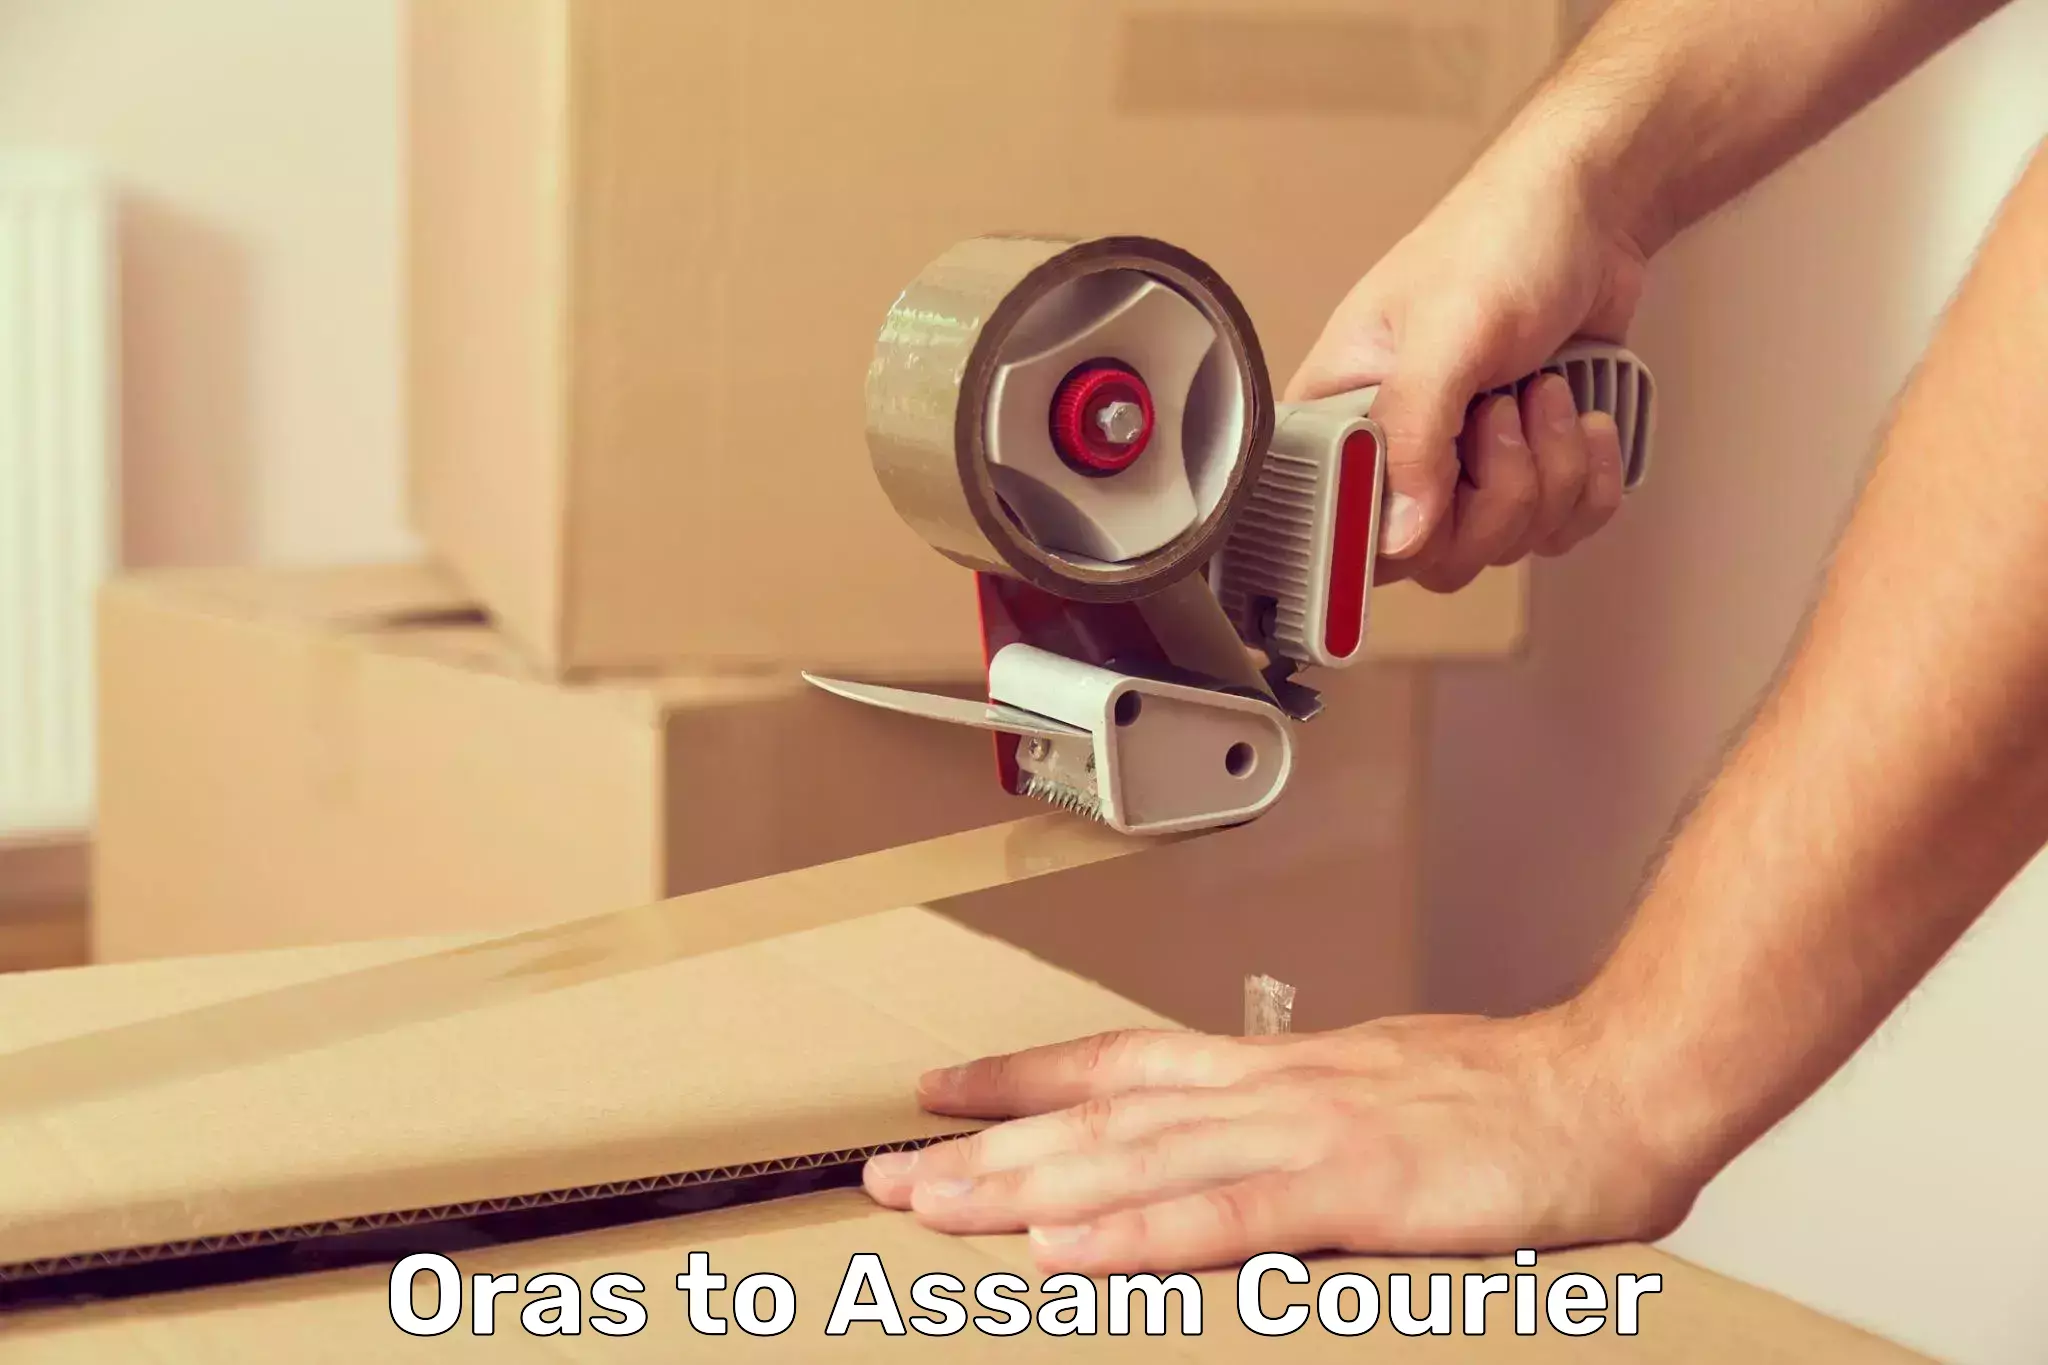 Tech-enabled shipping in Oras to Assam